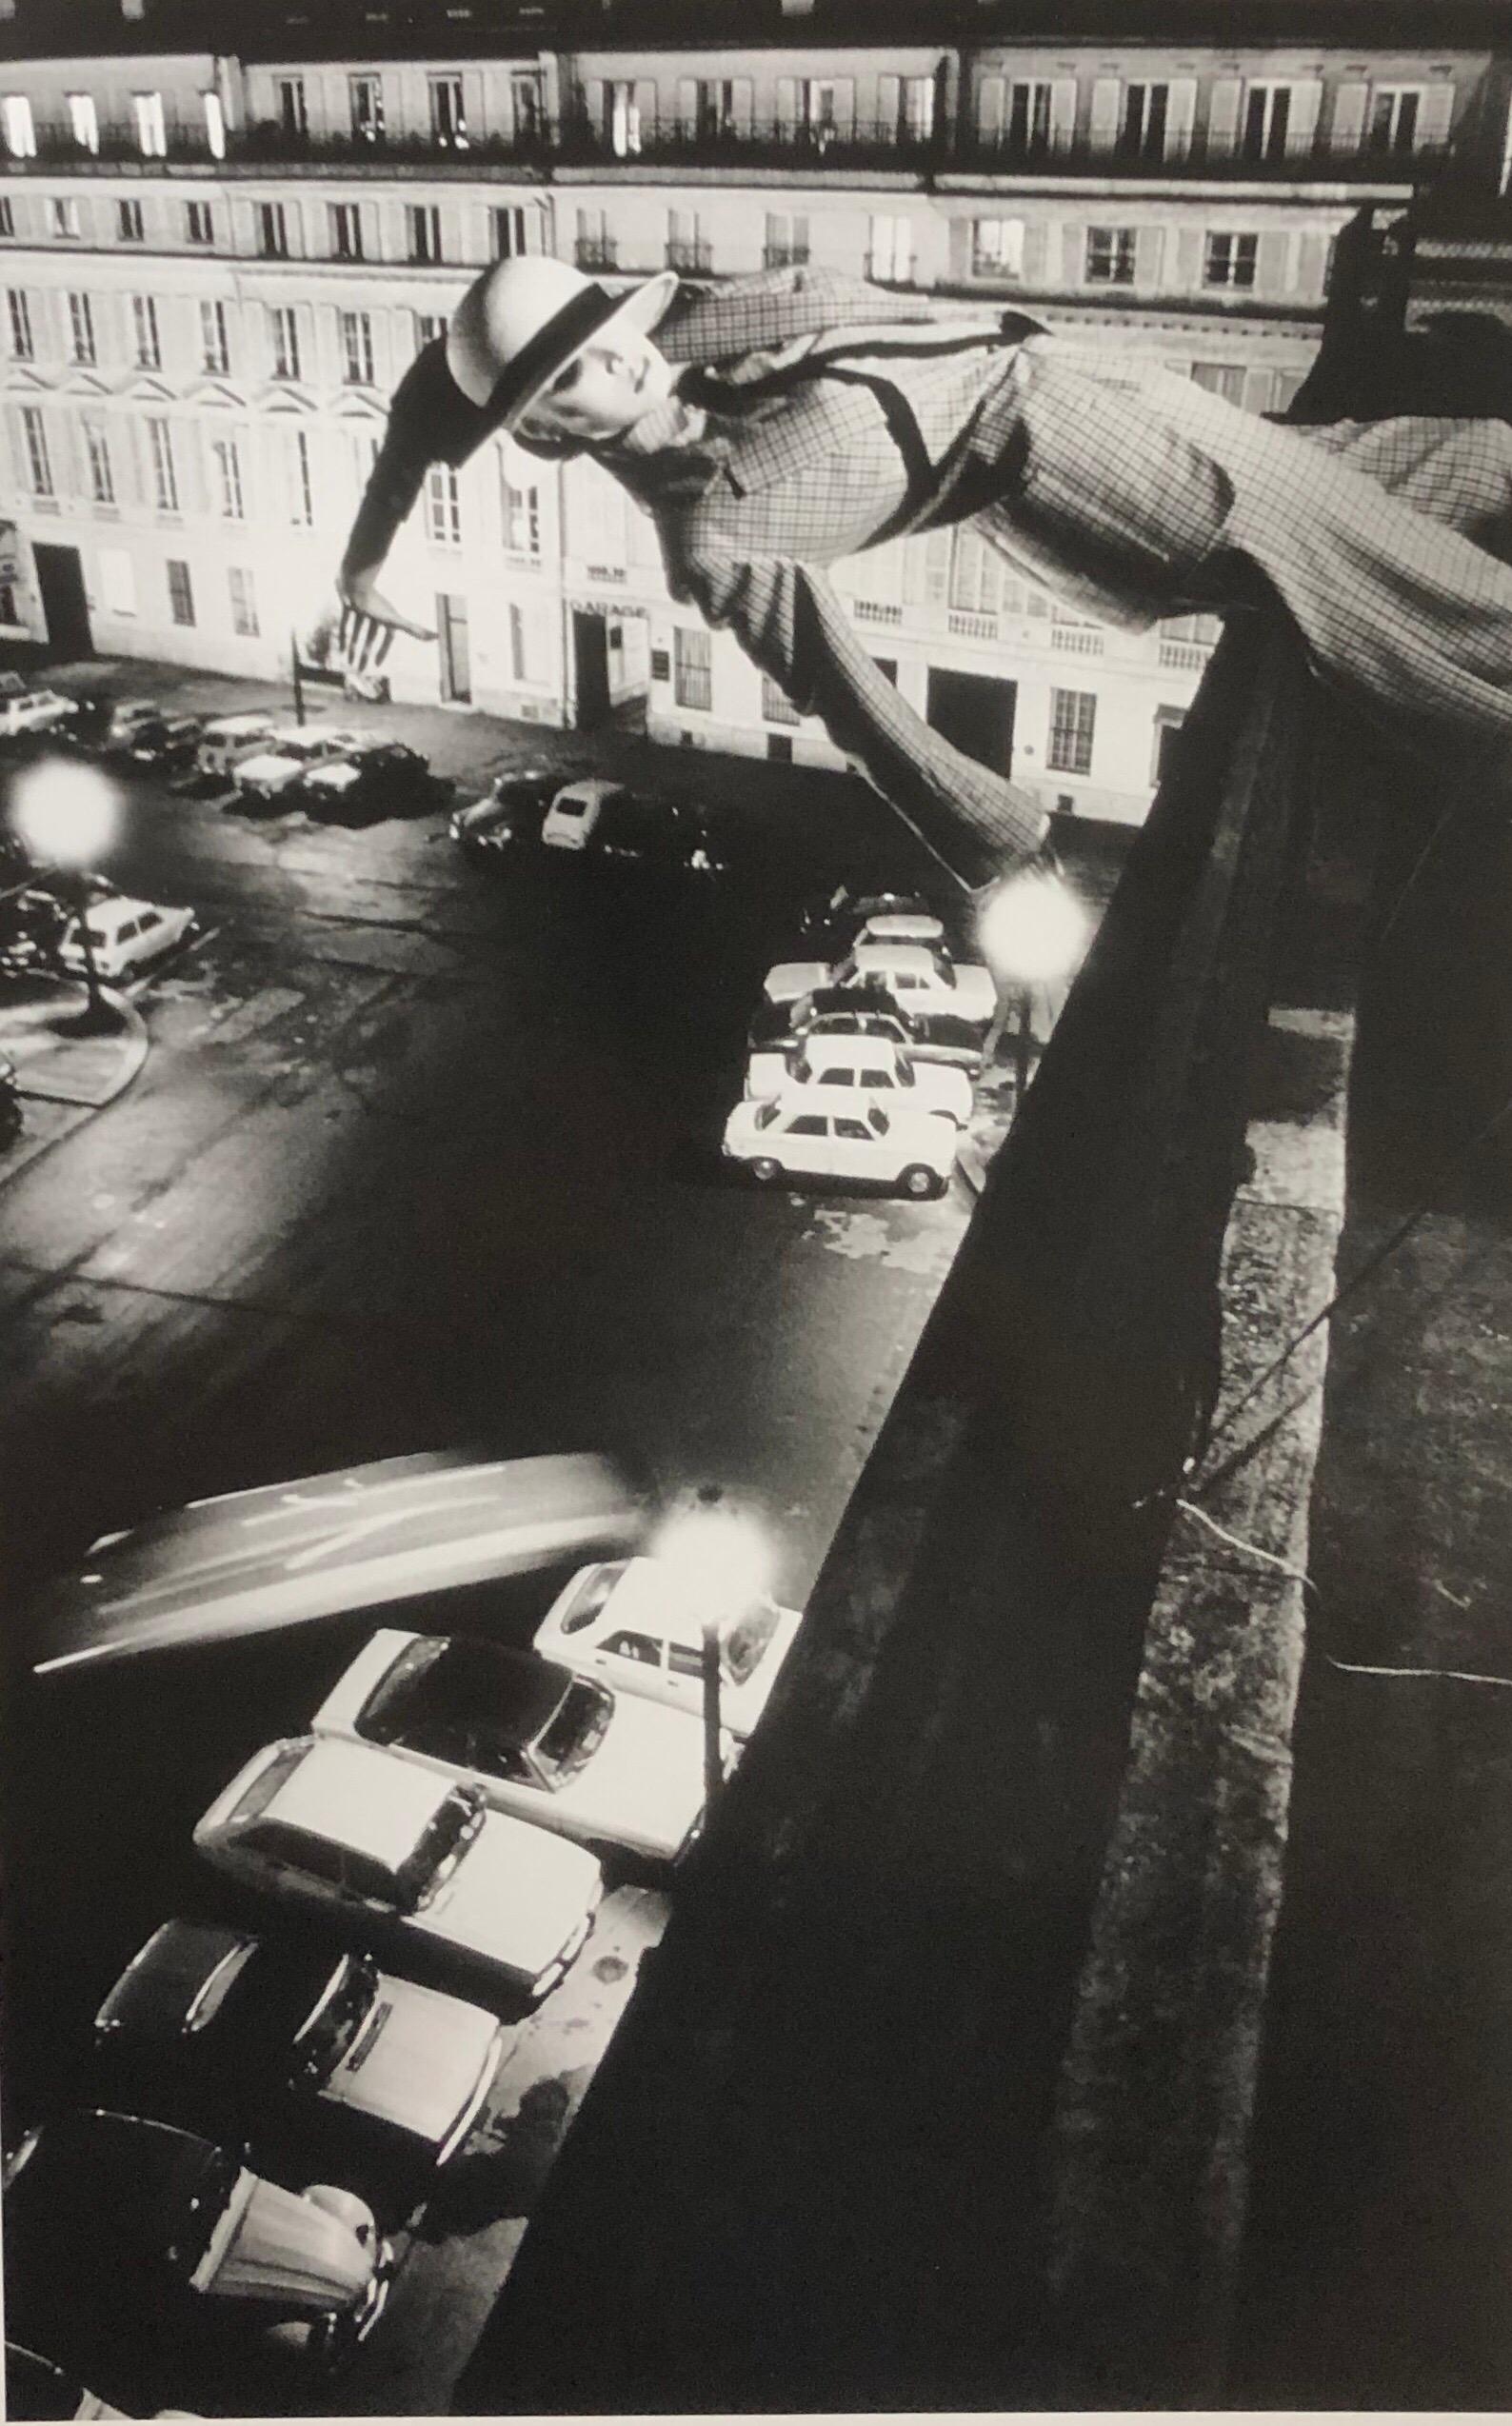 In ‘Mannequin Toss, Paris 1978’, Newton recreates a surrealistic image taking direction from Yves Klein's seminal "Leap Into the Void'.  The unnatural form of the figure, uncommon perspective, and the contrast between the stillness of the figure and